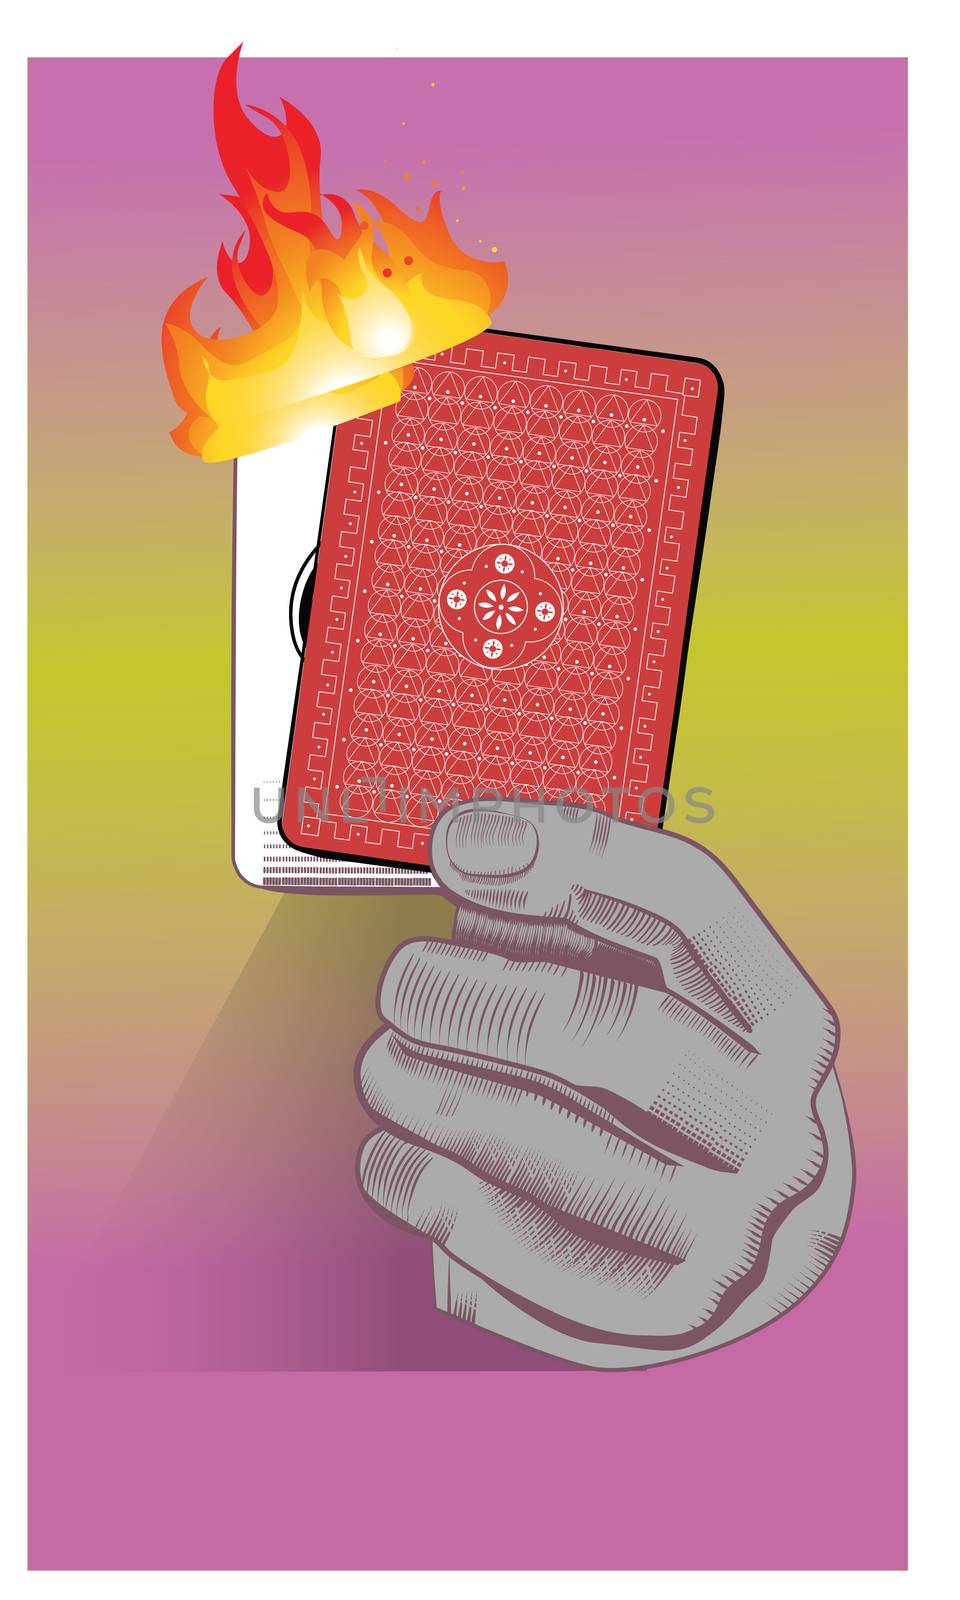 playing card is burning in hand by aanavcreationsplus